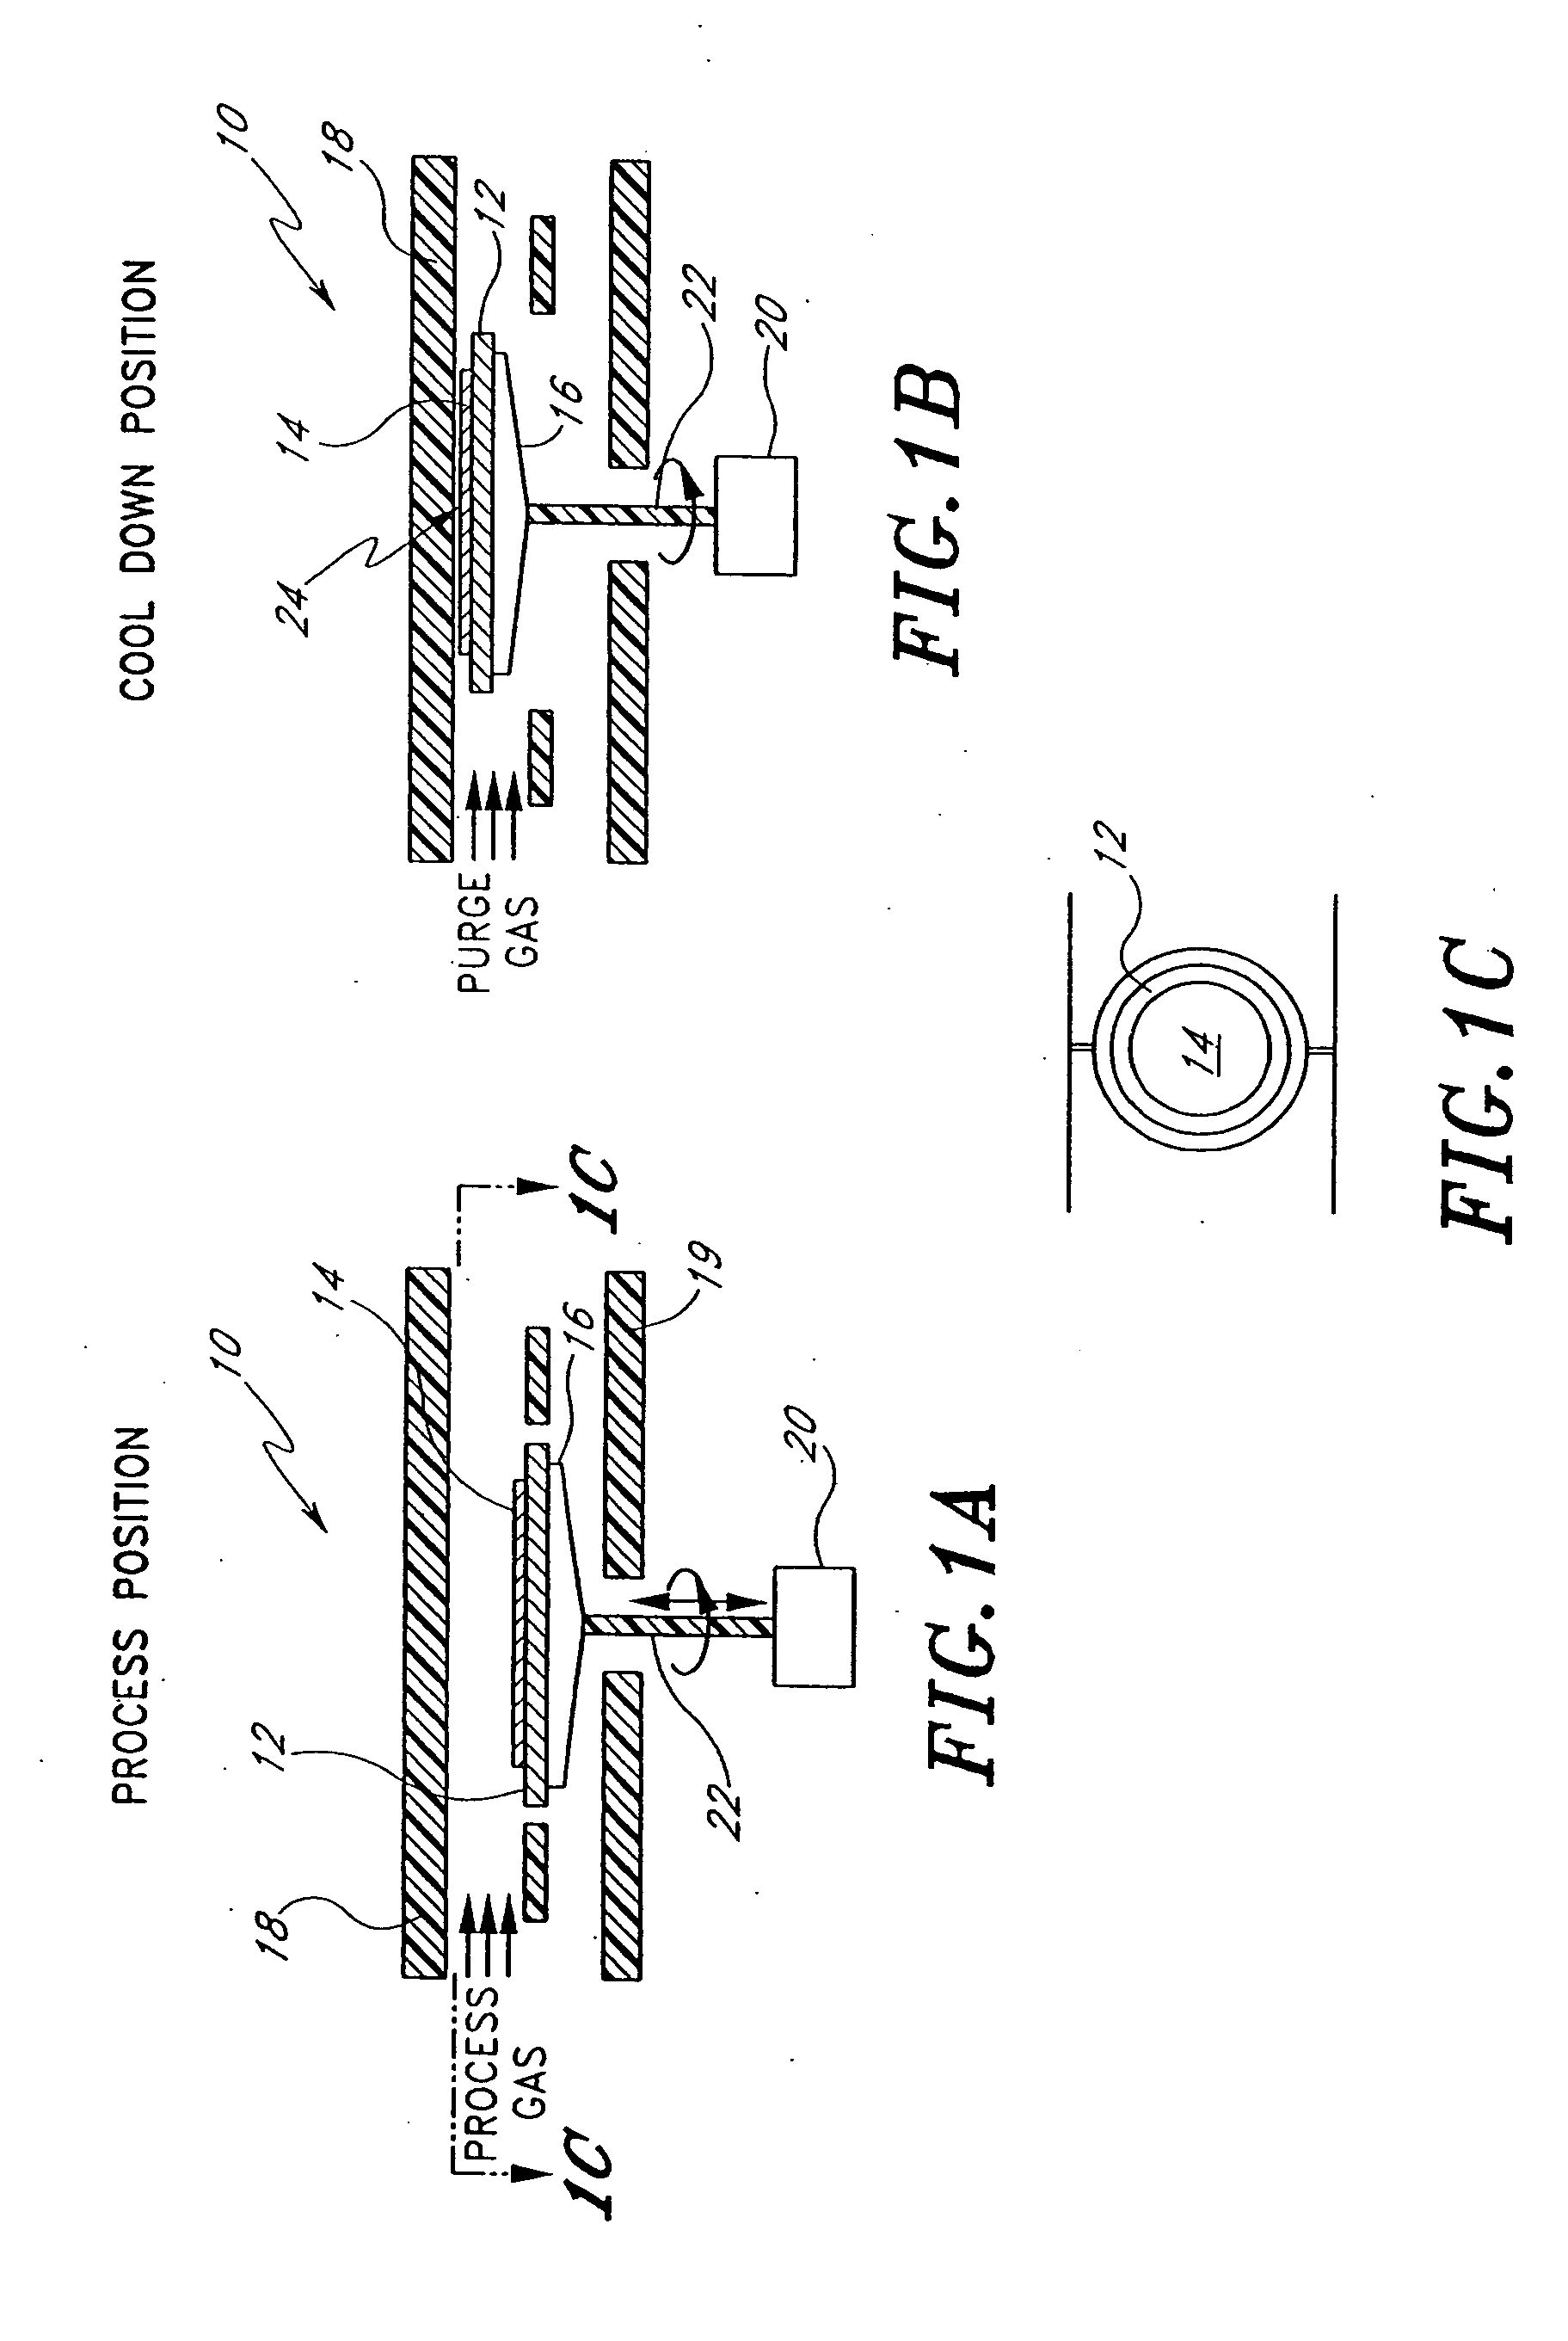 Apparatus for thermal treatment of substrates